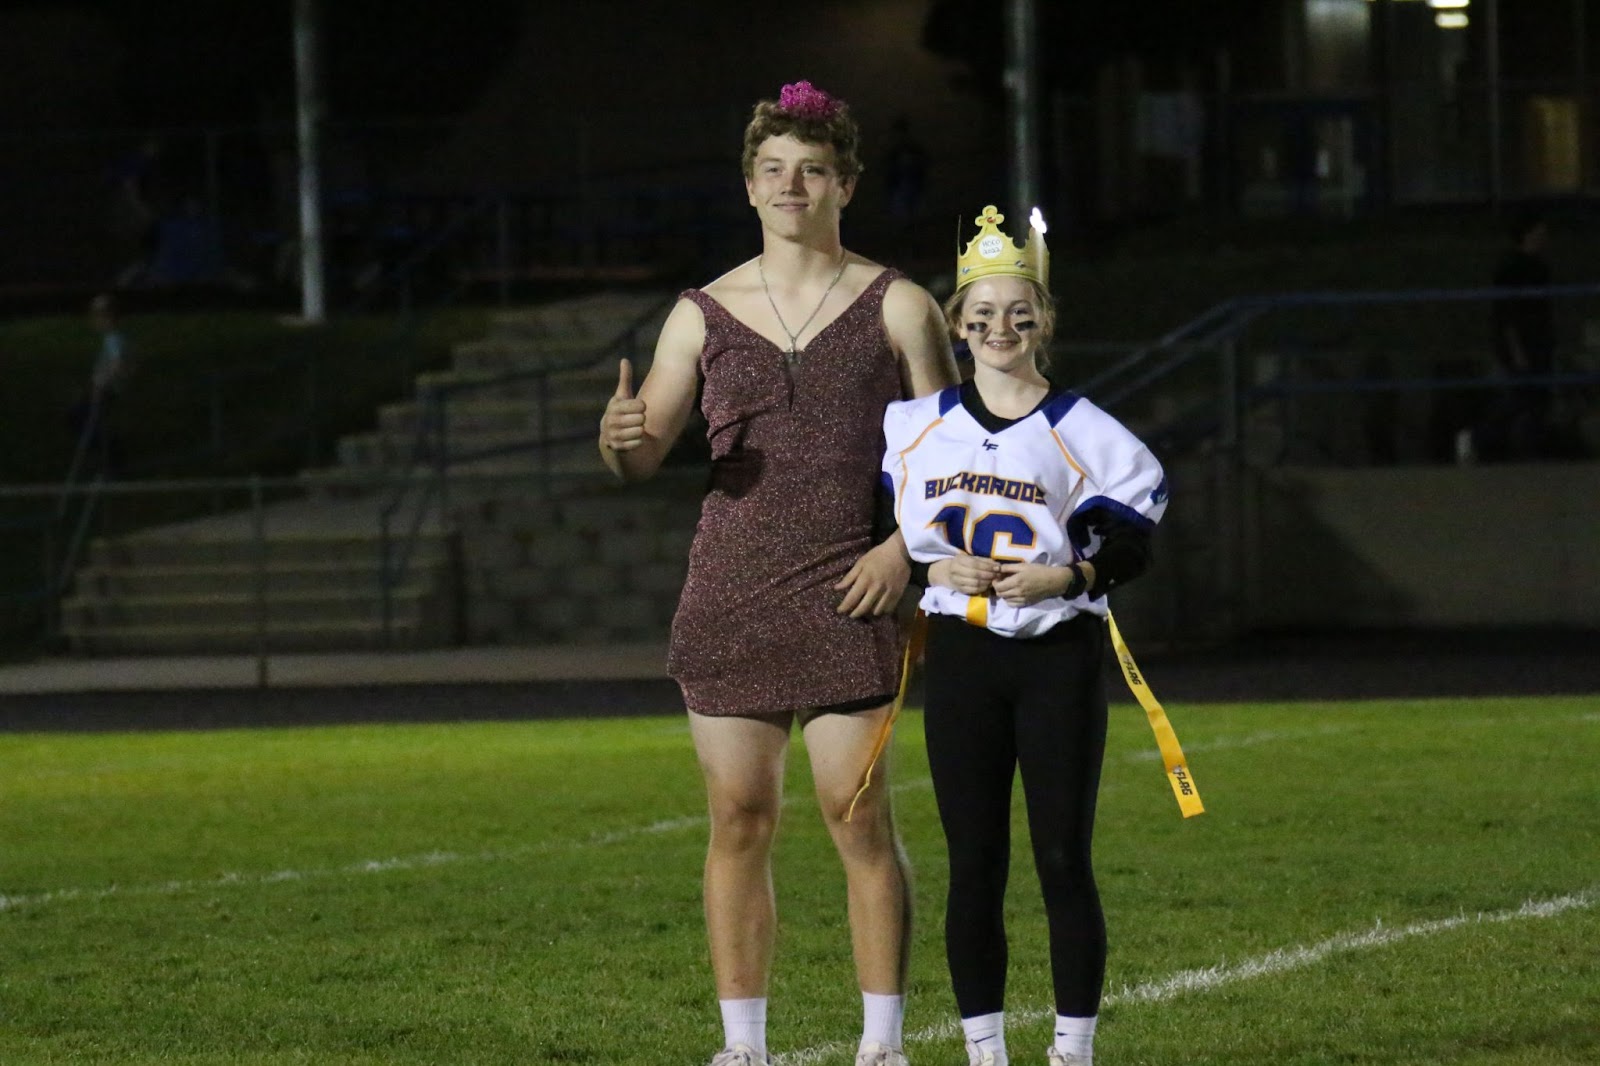 Powderpuff royalty Chandler Lewiter and Destiny Medicine Cloud at halftime during the Powderpuff game. /Jovi Anderson •The Brand